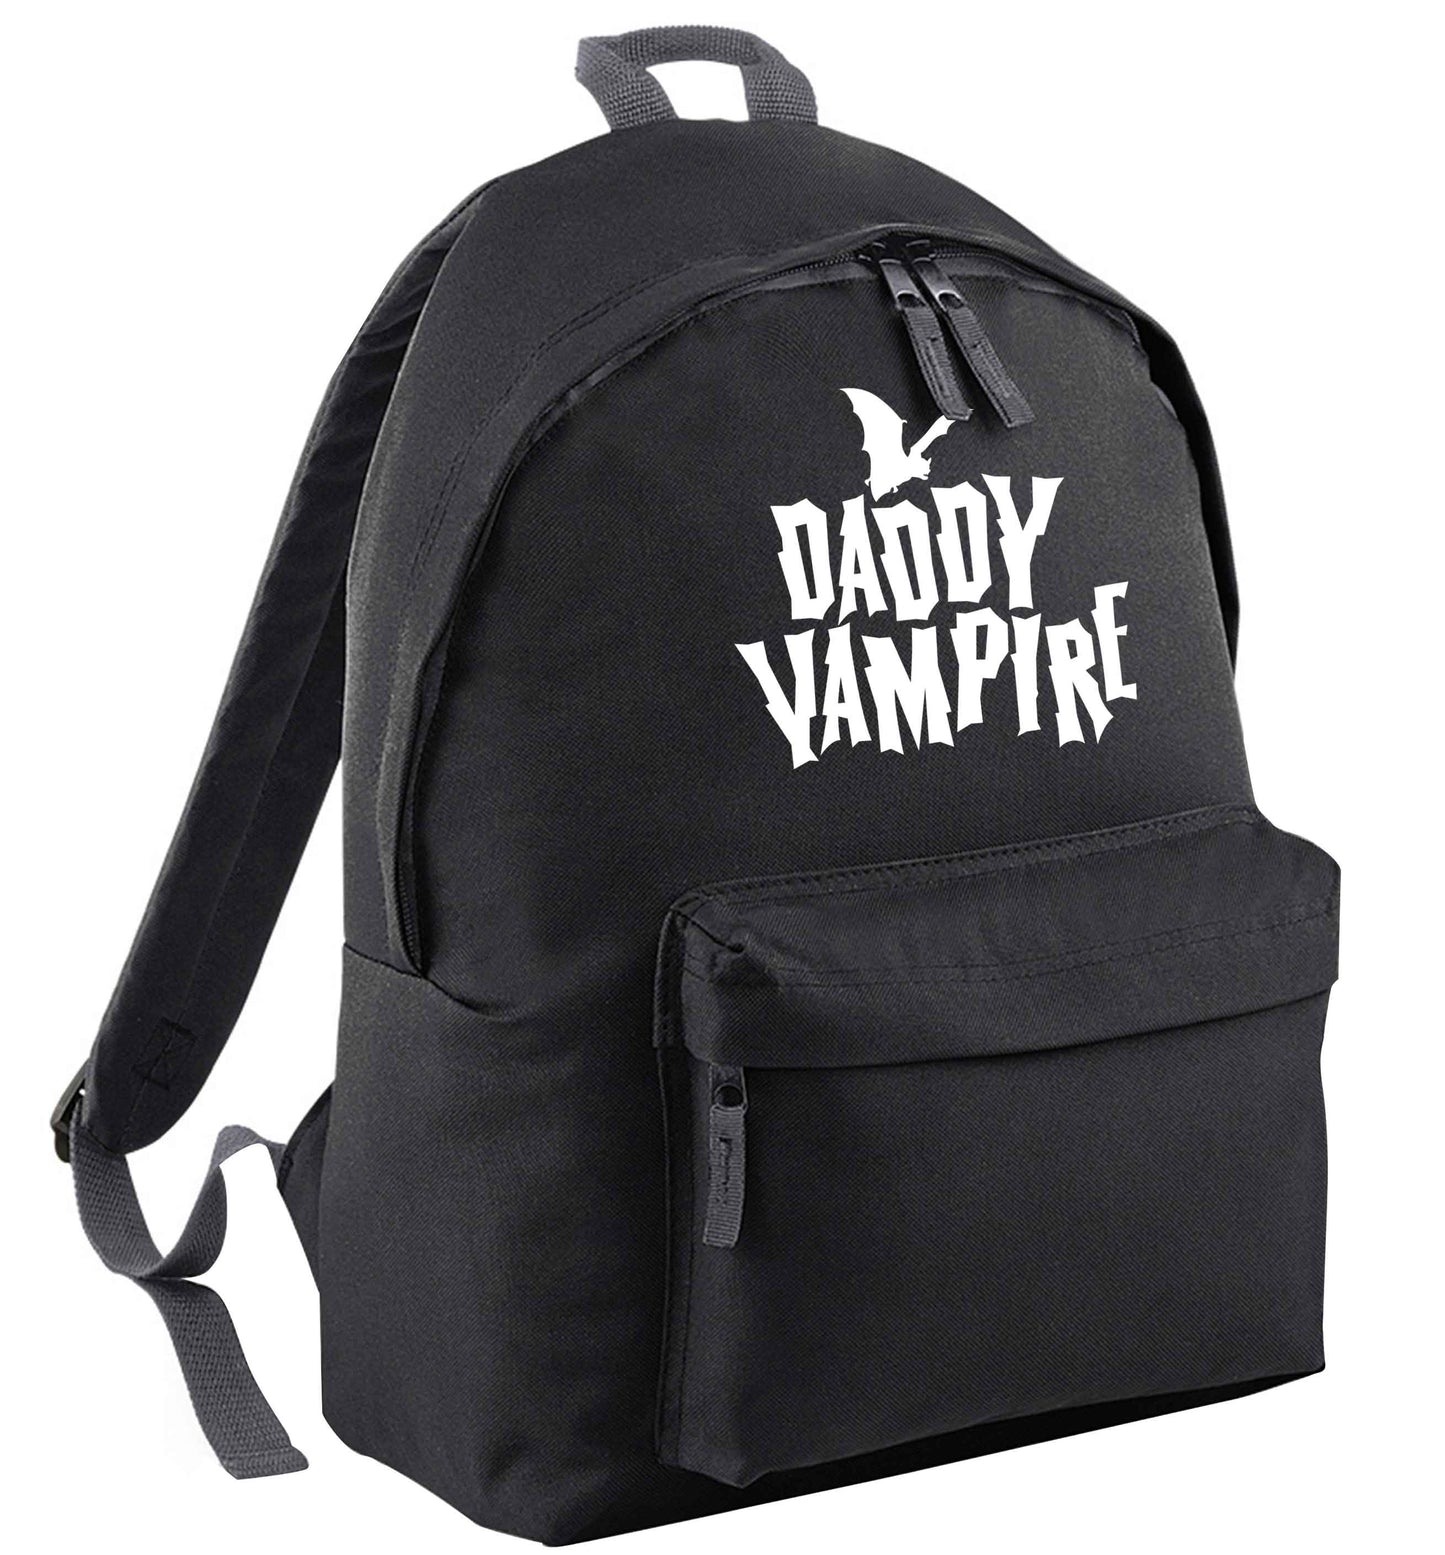 Daddy vampire black adults backpack